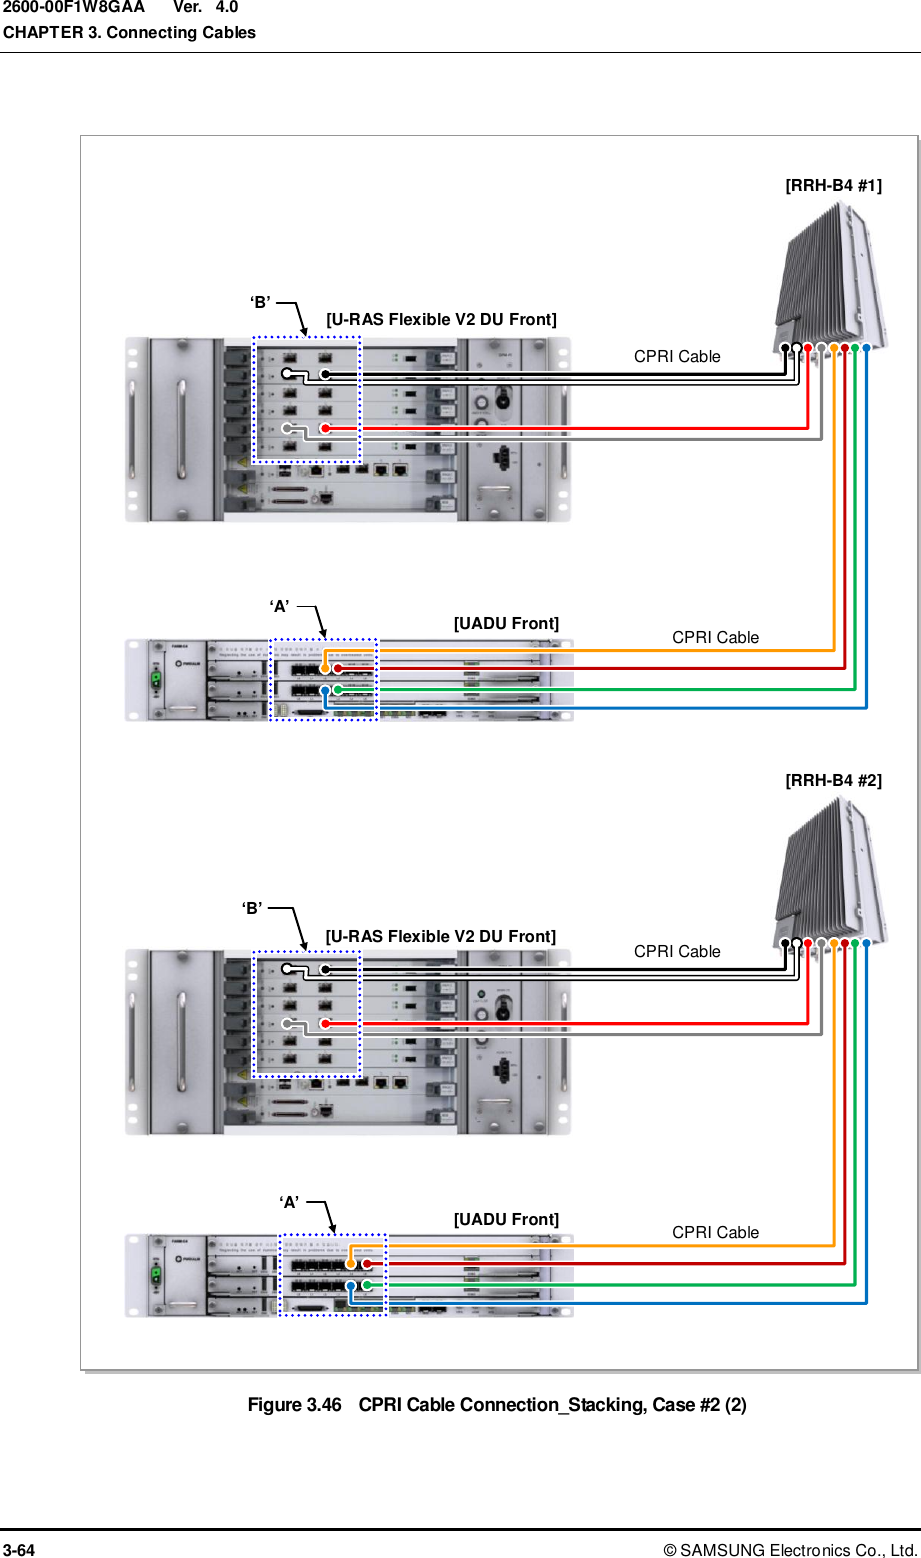  Ver.  CHAPTER 3. Connecting Cables 3-64 ©  SAMSUNG Electronics Co., Ltd. 2600-00F1W8GAA 4.0  Figure 3.46  CPRI Cable Connection_Stacking, Case #2 (2)  [UADU Front] [U-RAS Flexible V2 DU Front] [UADU Front] [U-RAS Flexible V2 DU Front]  [RRH-B4 #1] ‘A’ CPRI Cable CPRI Cable ‘B’ [RRH-B4 #2] ‘A’ CPRI Cable CPRI Cable ‘B’ 